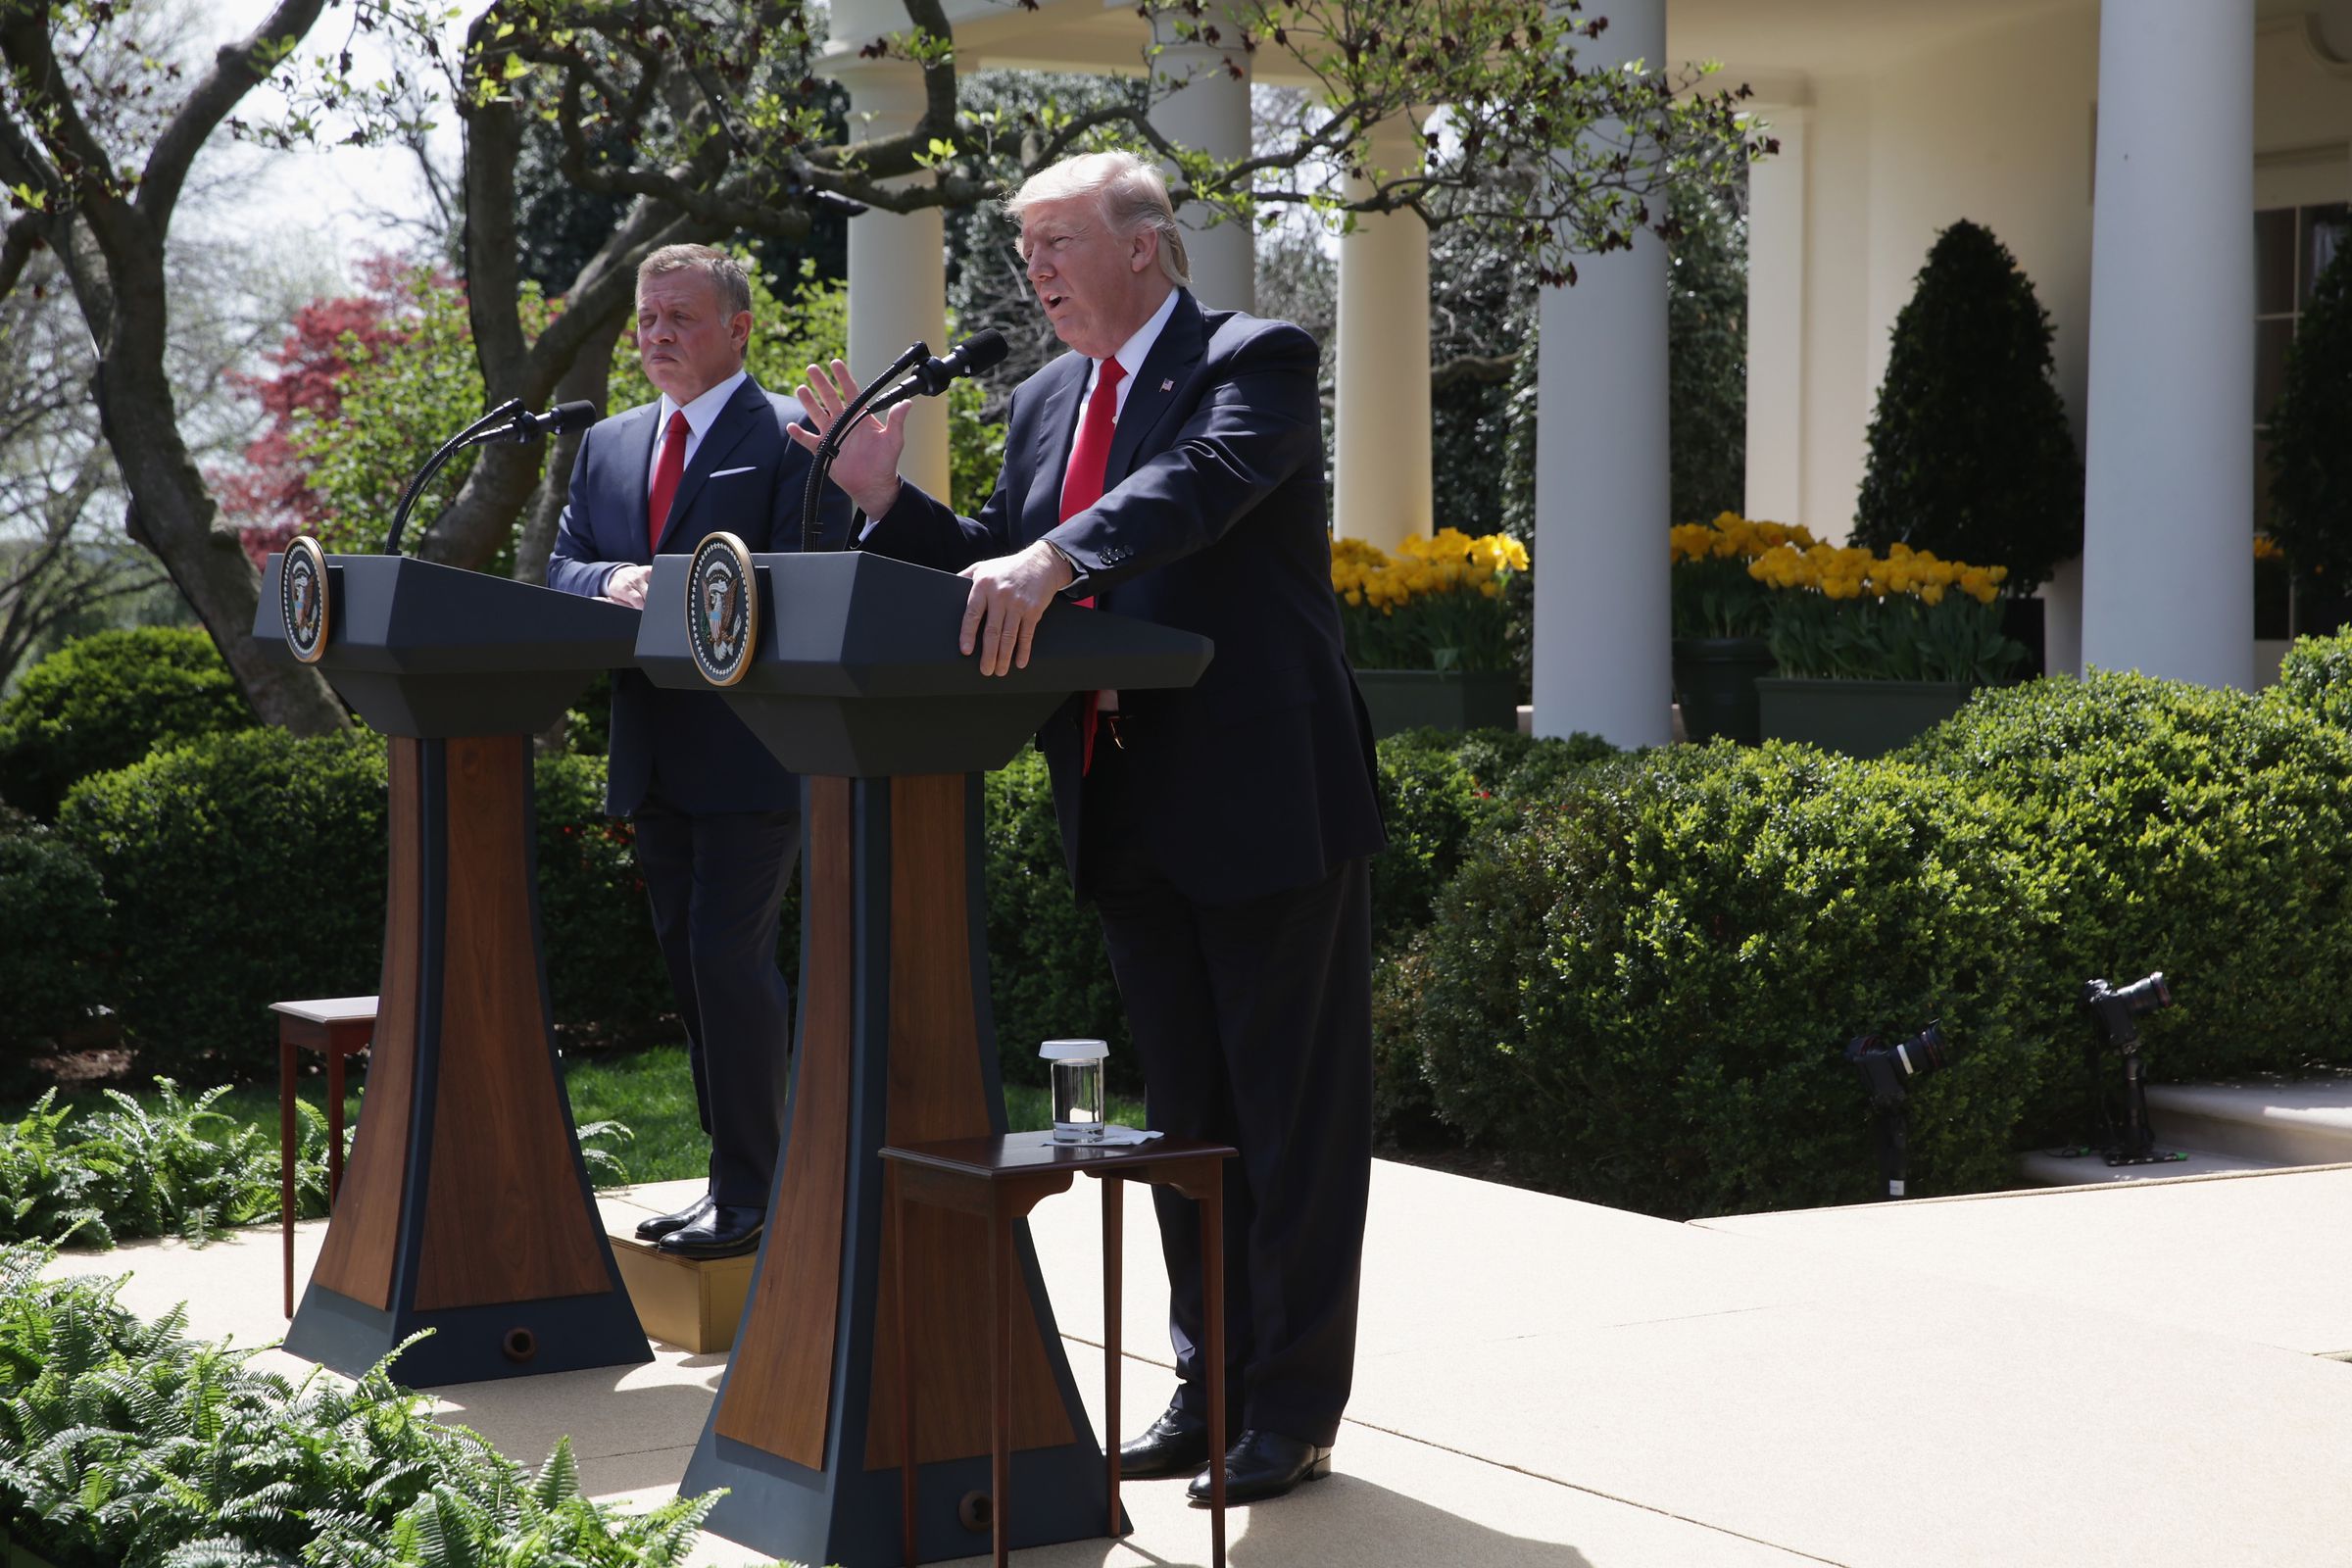 WASHINGTON, DC - APRIL 05: U.S. President Donald Trump and King Abdullah II of Jordan participate in a joint news conference at the Rose Garden of the White House April 5, 2017 in Washington, DC. President Trump held talks on Middle East peace process and other bilateral issues with King Abdullah II.